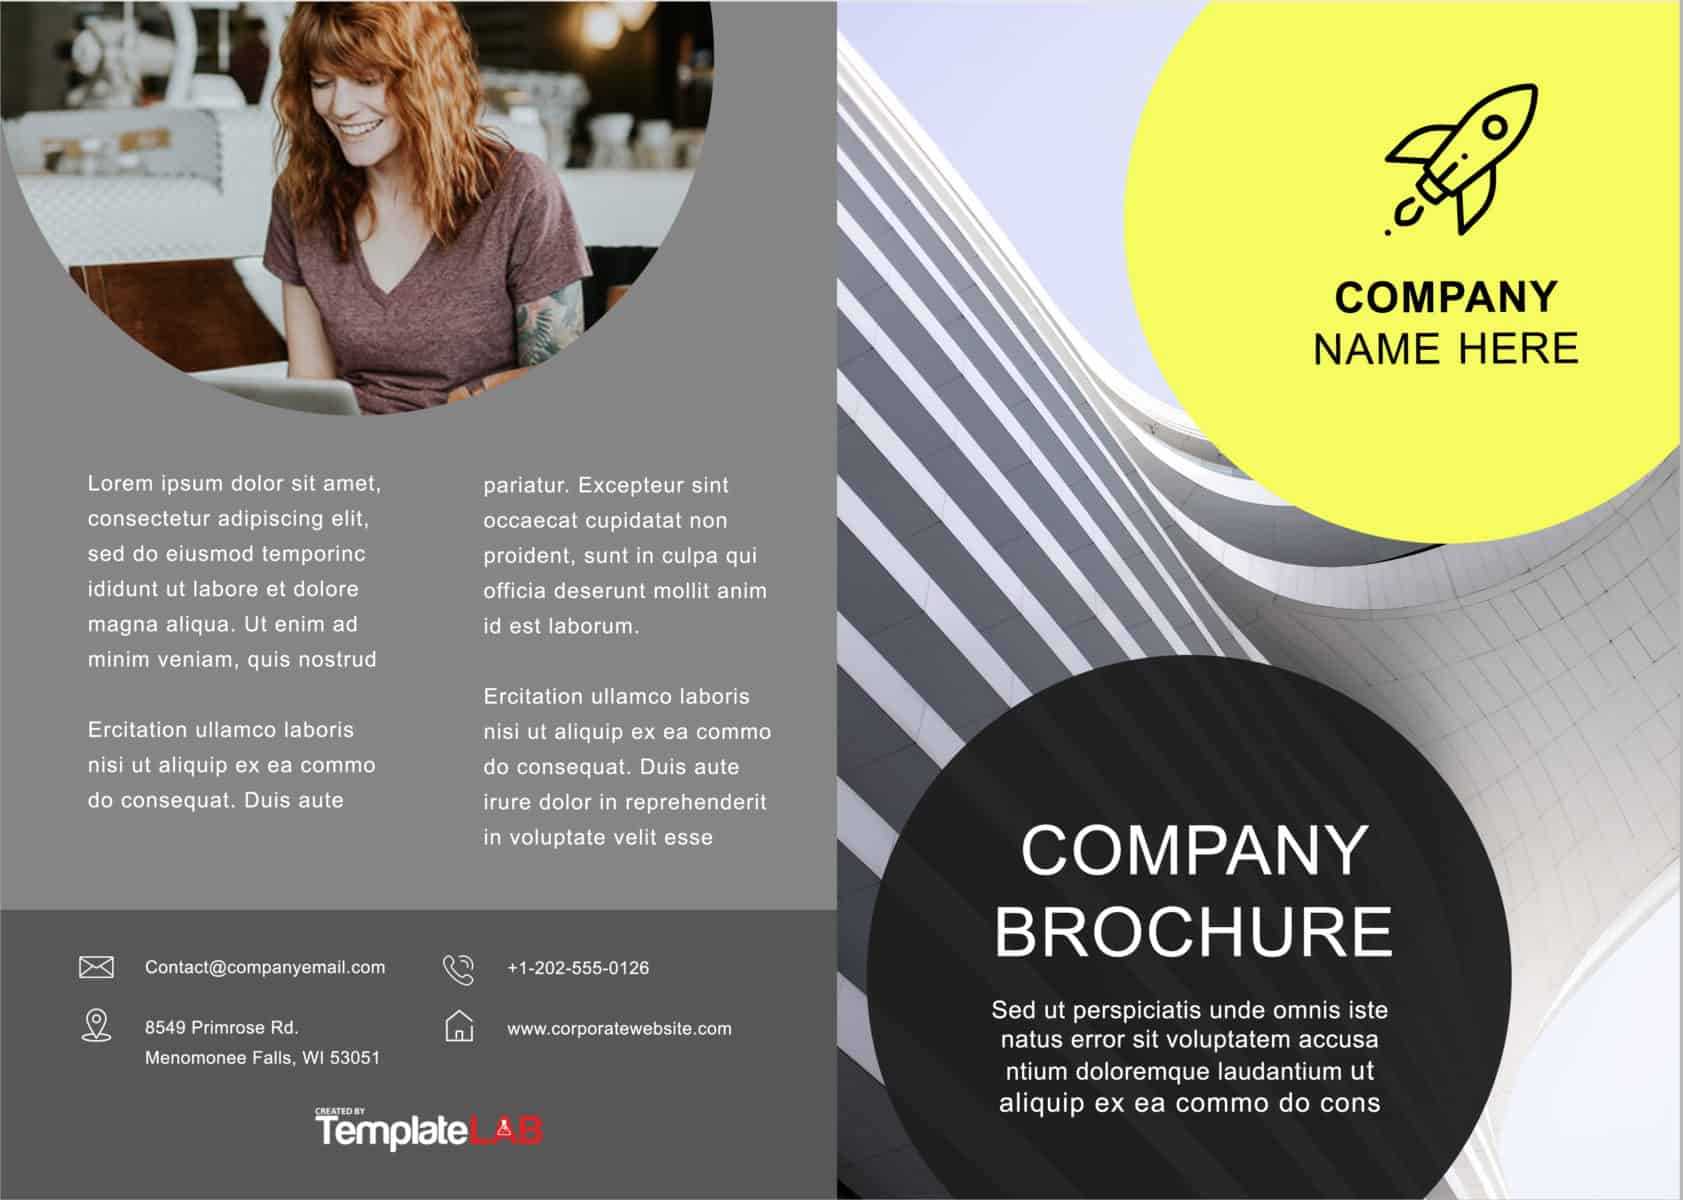 33 Free Brochure Templates (Word + Pdf) ᐅ Templatelab With Regard To Online Brochure Template Free